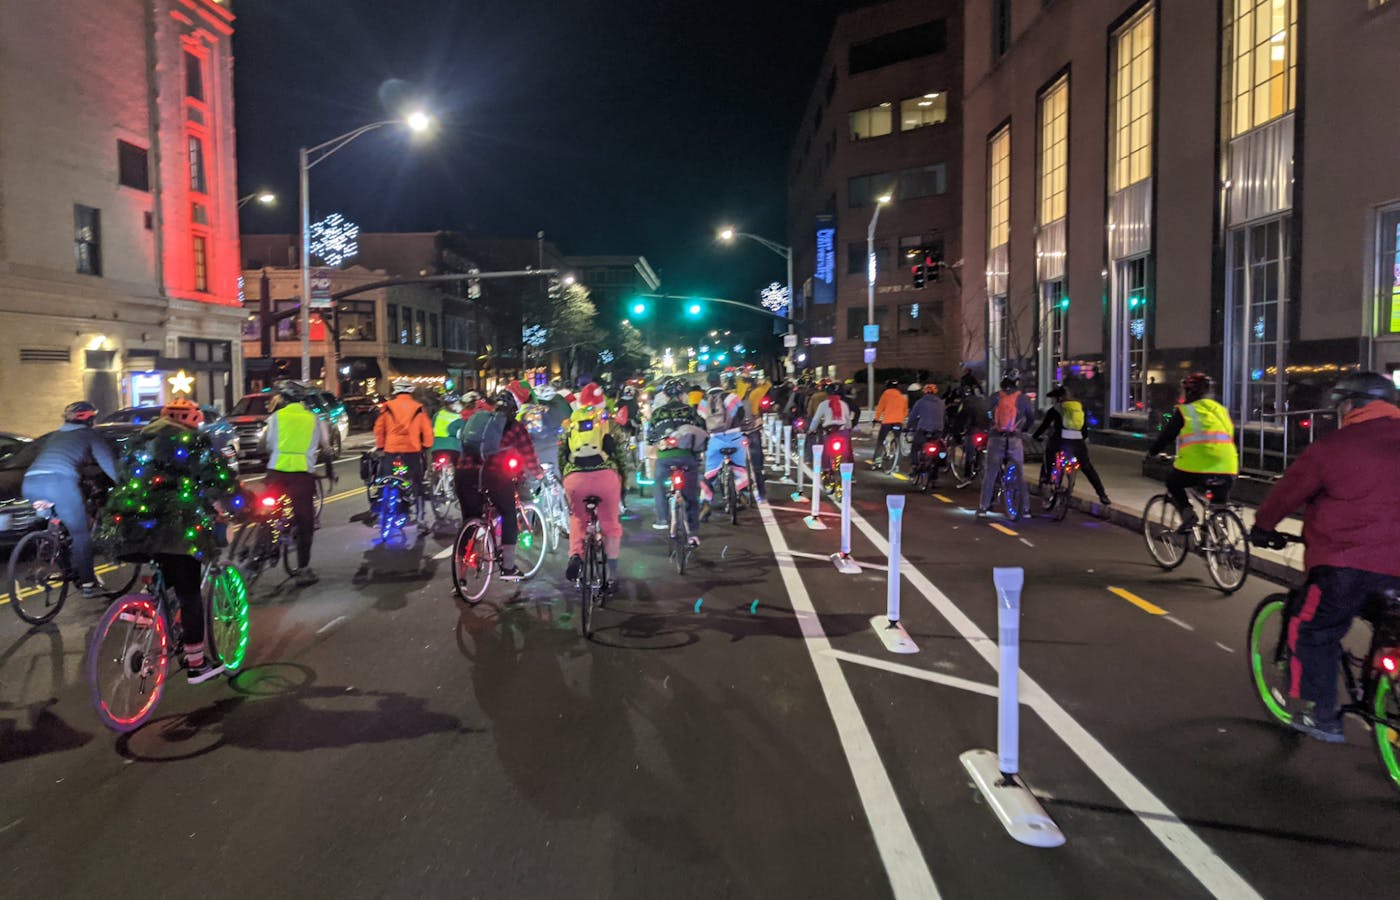 Community rides like Providence Bike Jam allow people of all ages and abilities to come together and support local bike advocacy efforts. (Photo credit: Providence Bike Jam)